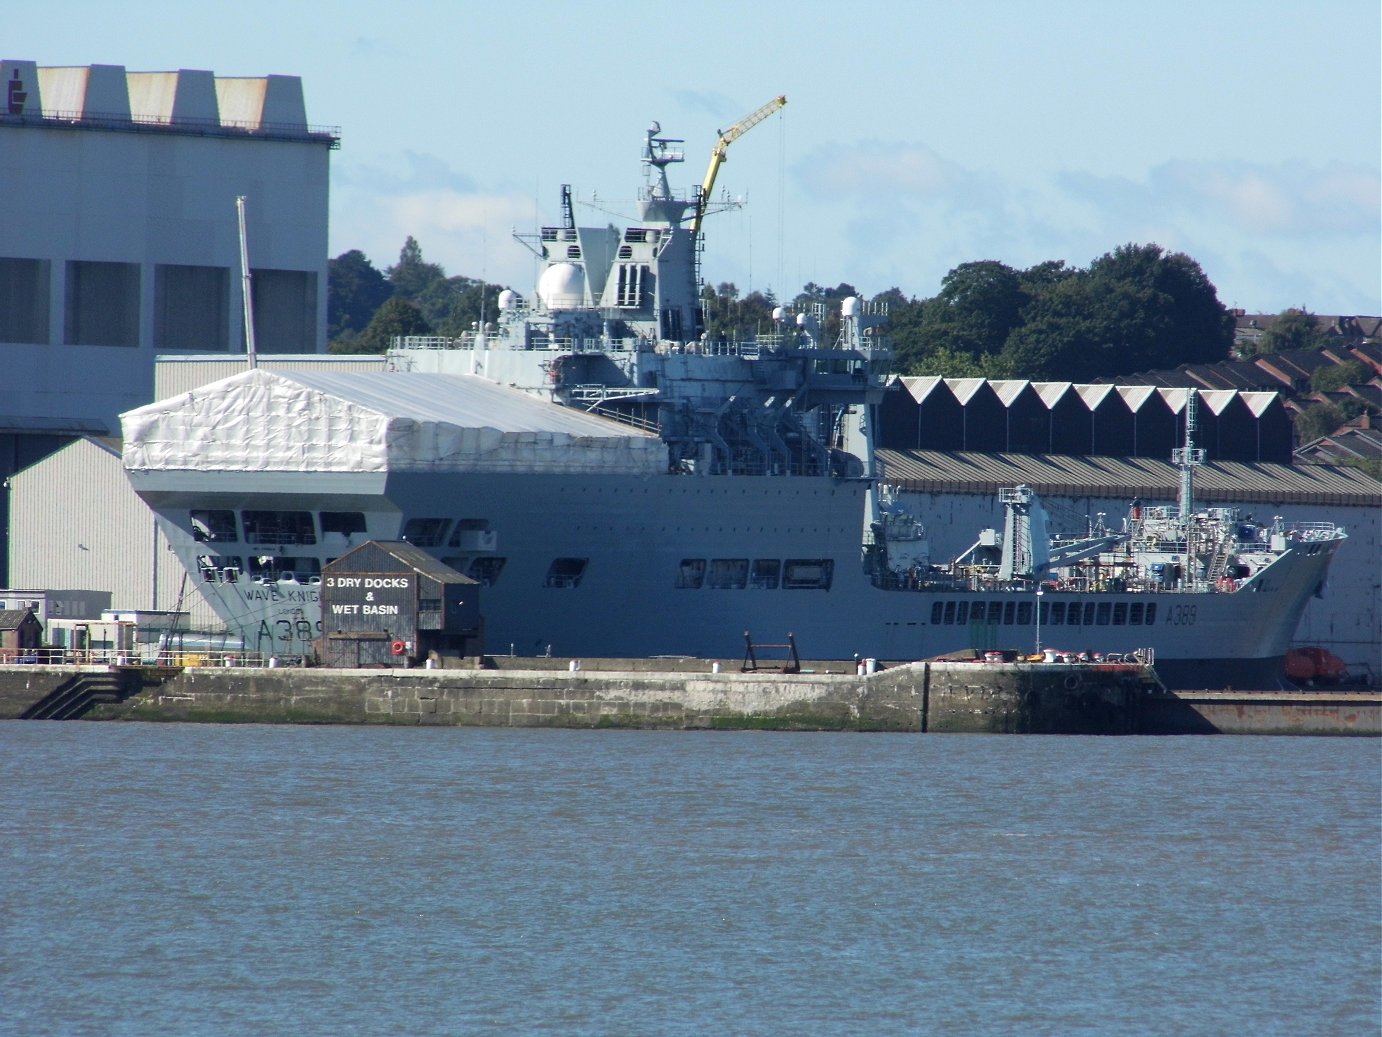 A387 RFA Wave Knight at Cammell Laird shipyard 30 August 2020.